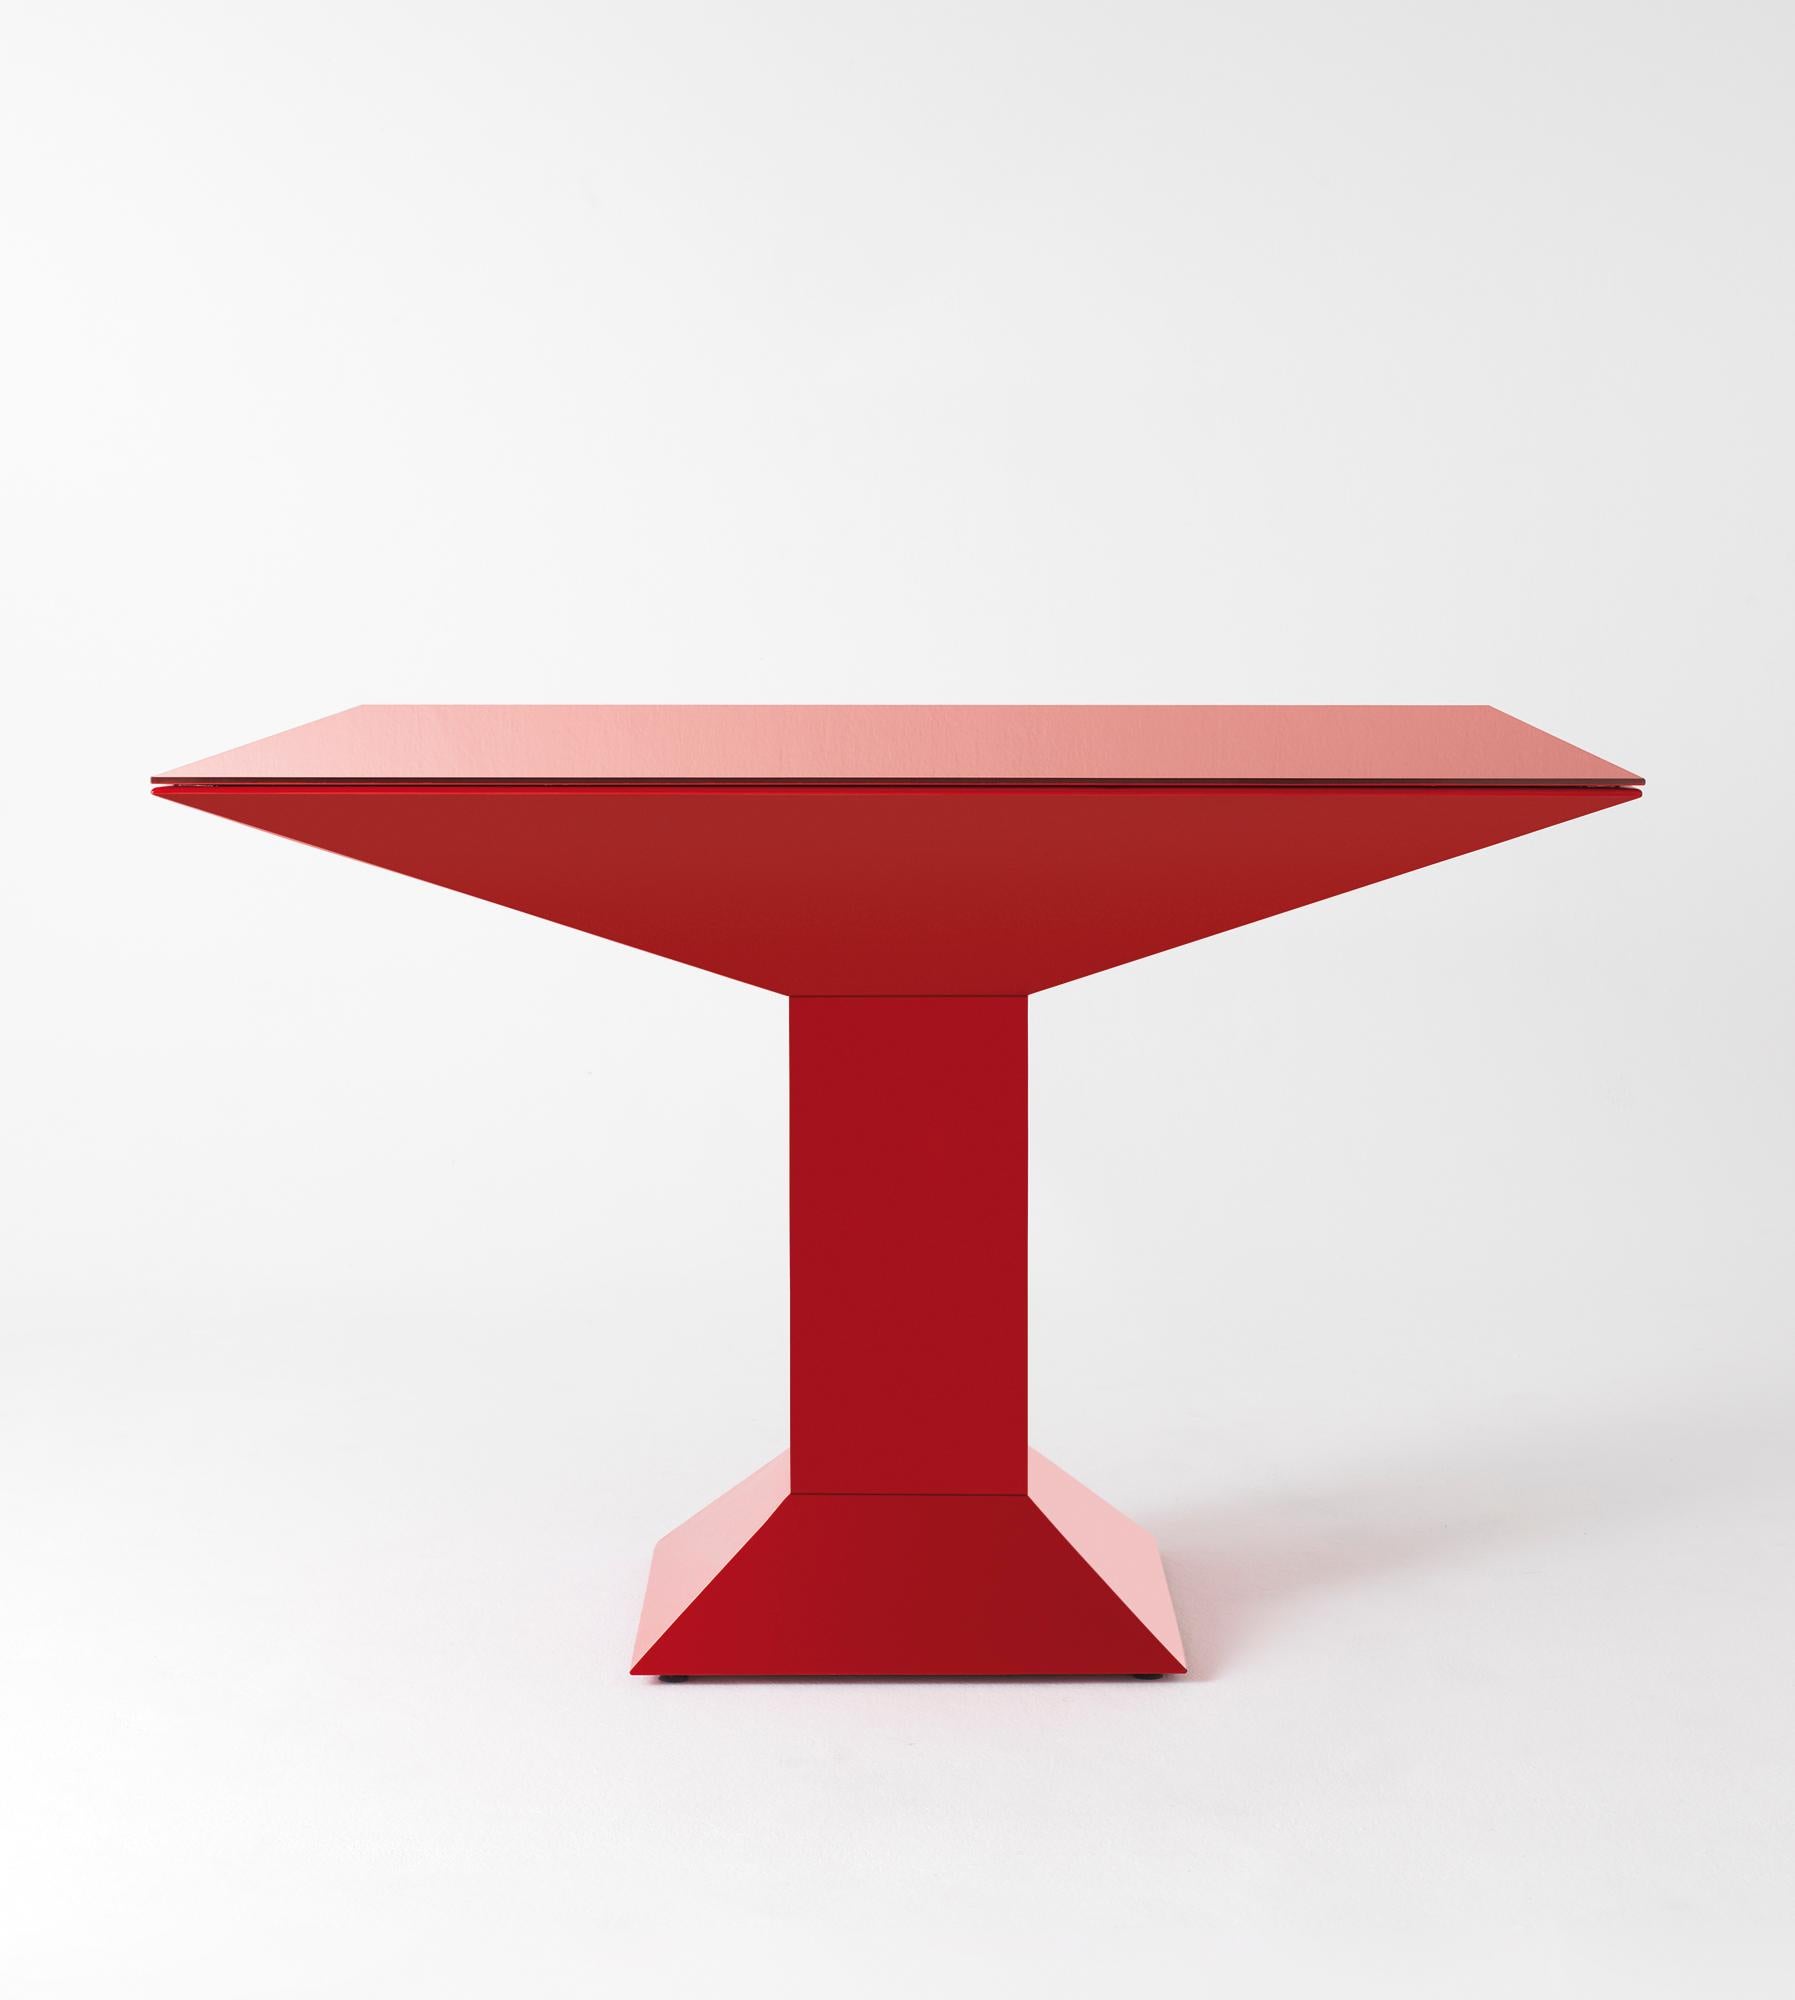 Mettsass dining table, Ettore Sottsass
Dimensions: 110 x 110 x 73 H cm
Materials: steel, glass

The structure is of flat sheets of steel painted in red. The glass on the top is painted in the same colour as the structure.

Irreverent,